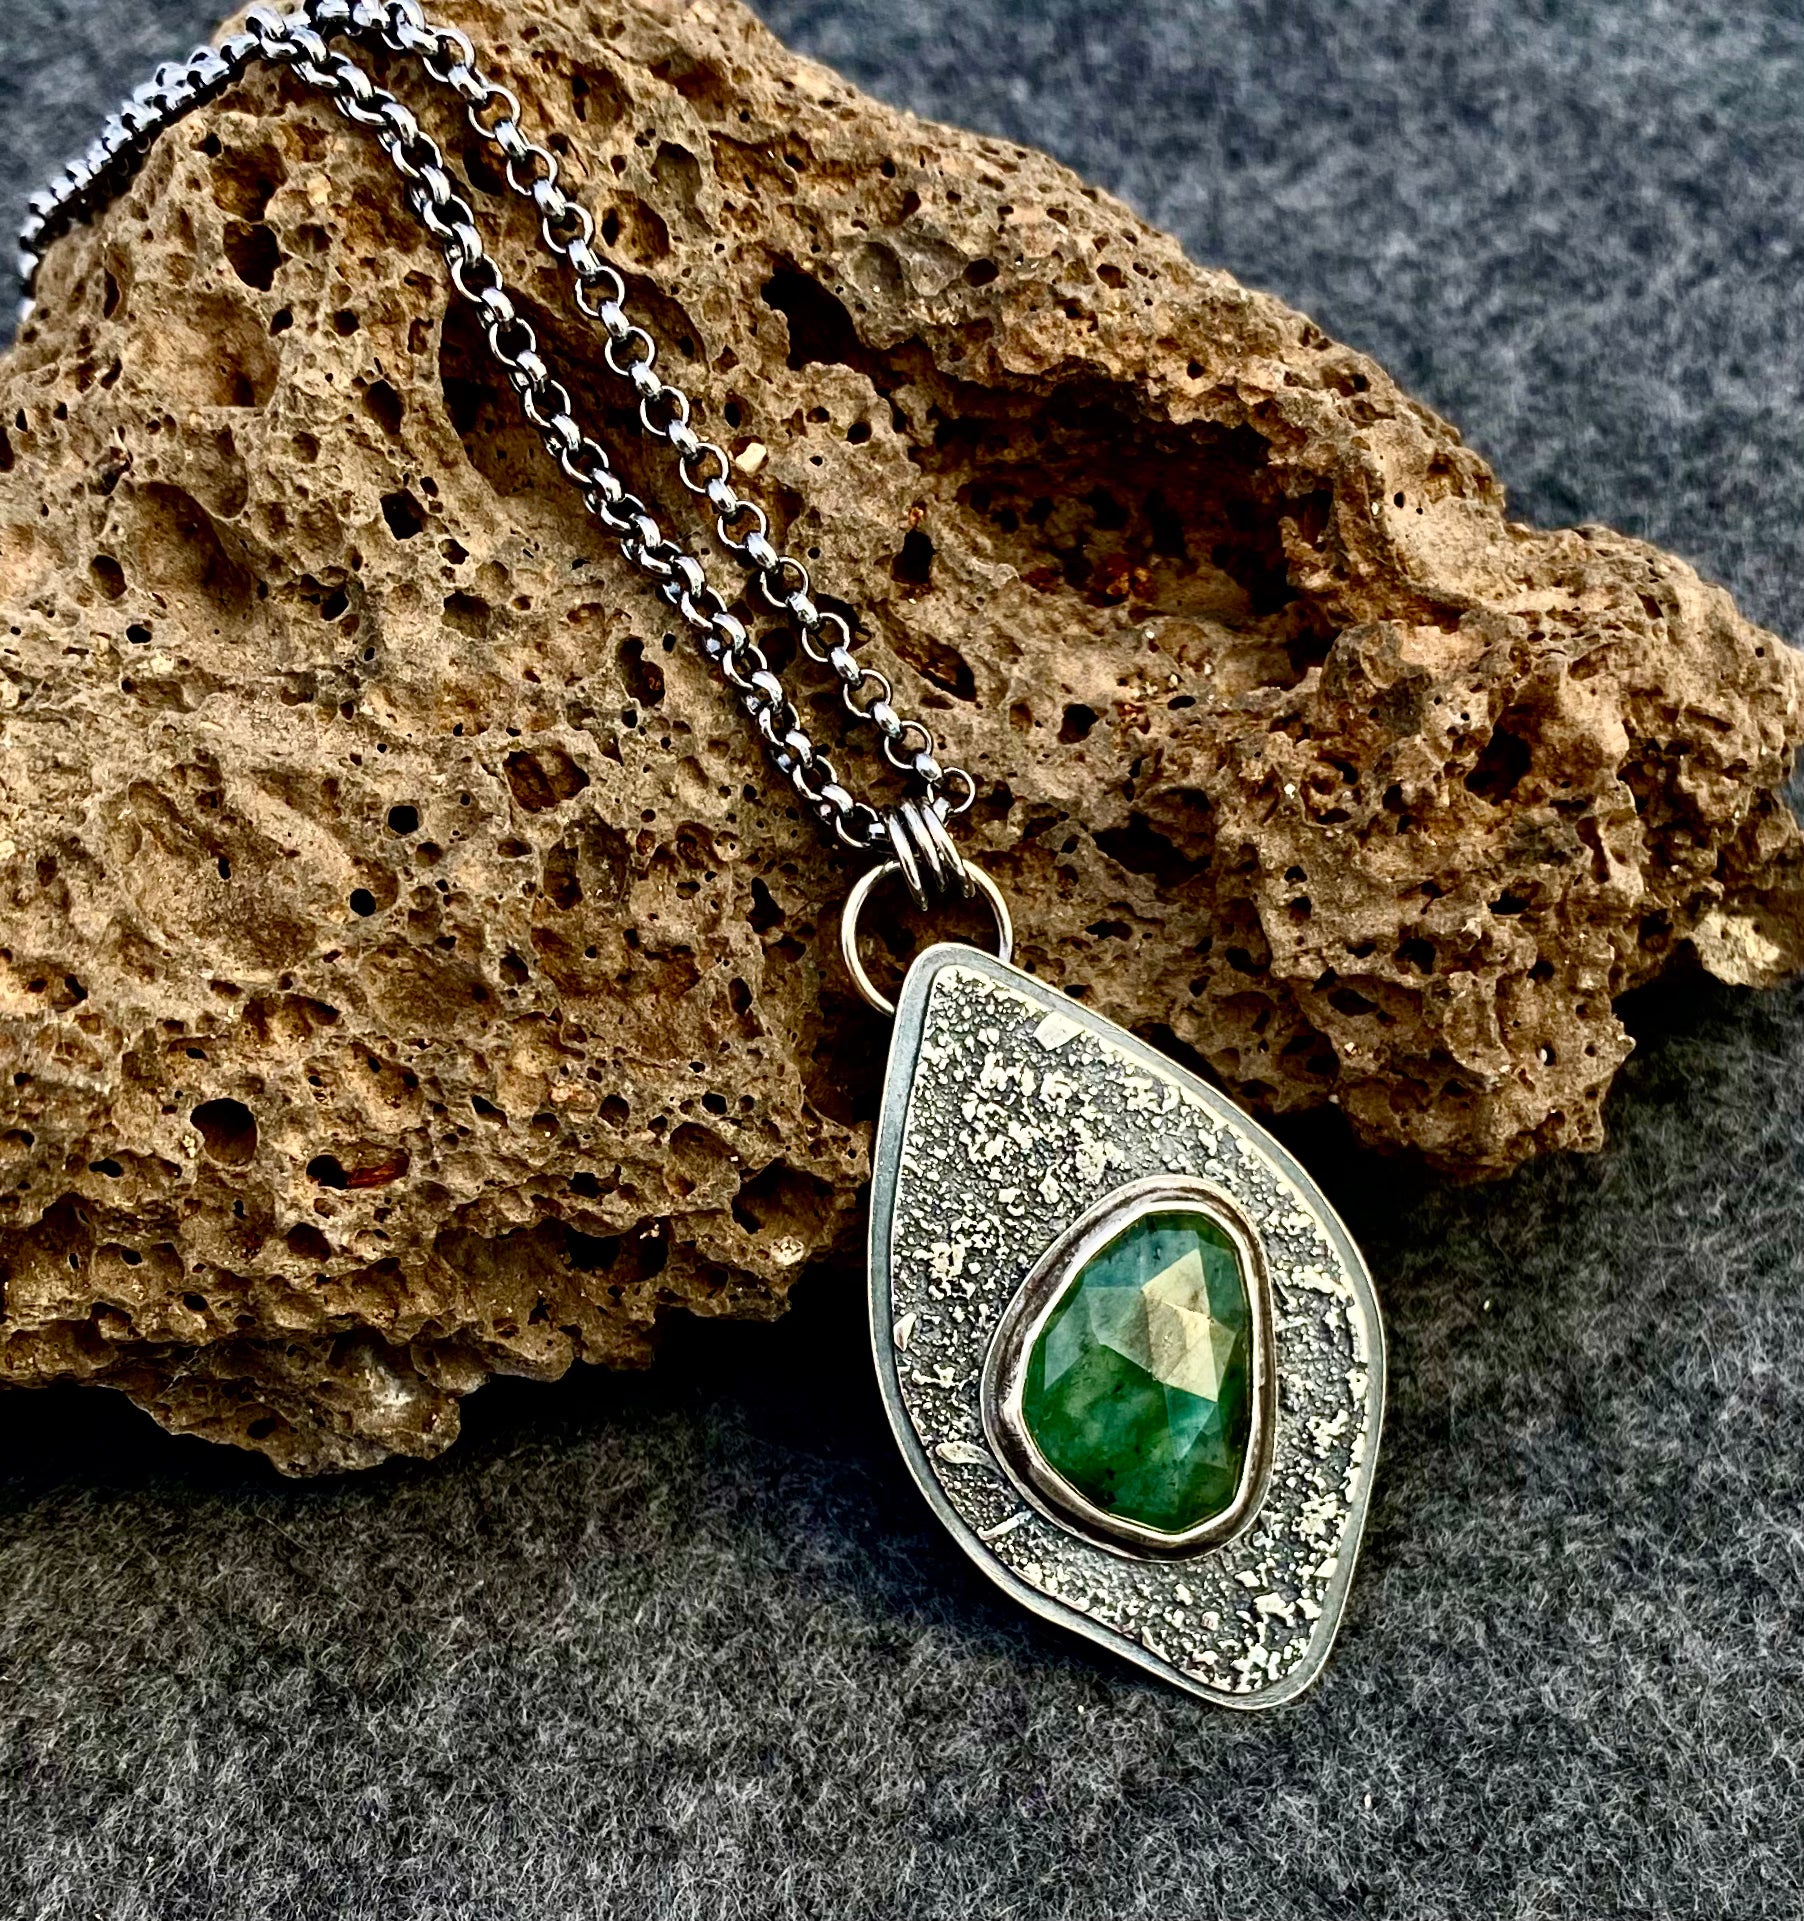 Stardust Pendant Necklace with Emerald and Sterling Silver